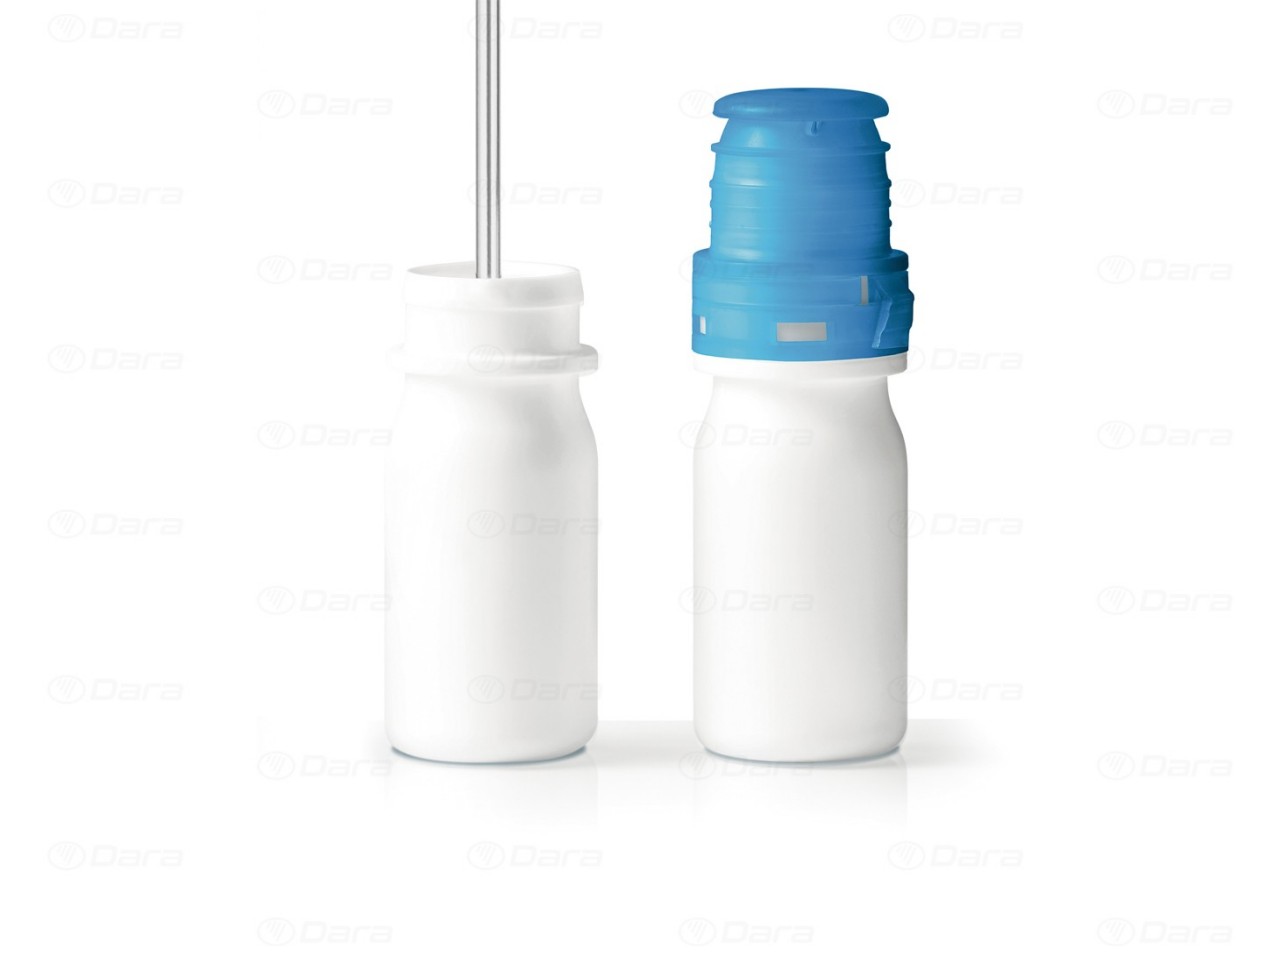 Rotary fillers - cappers for ophthalmic and nasal